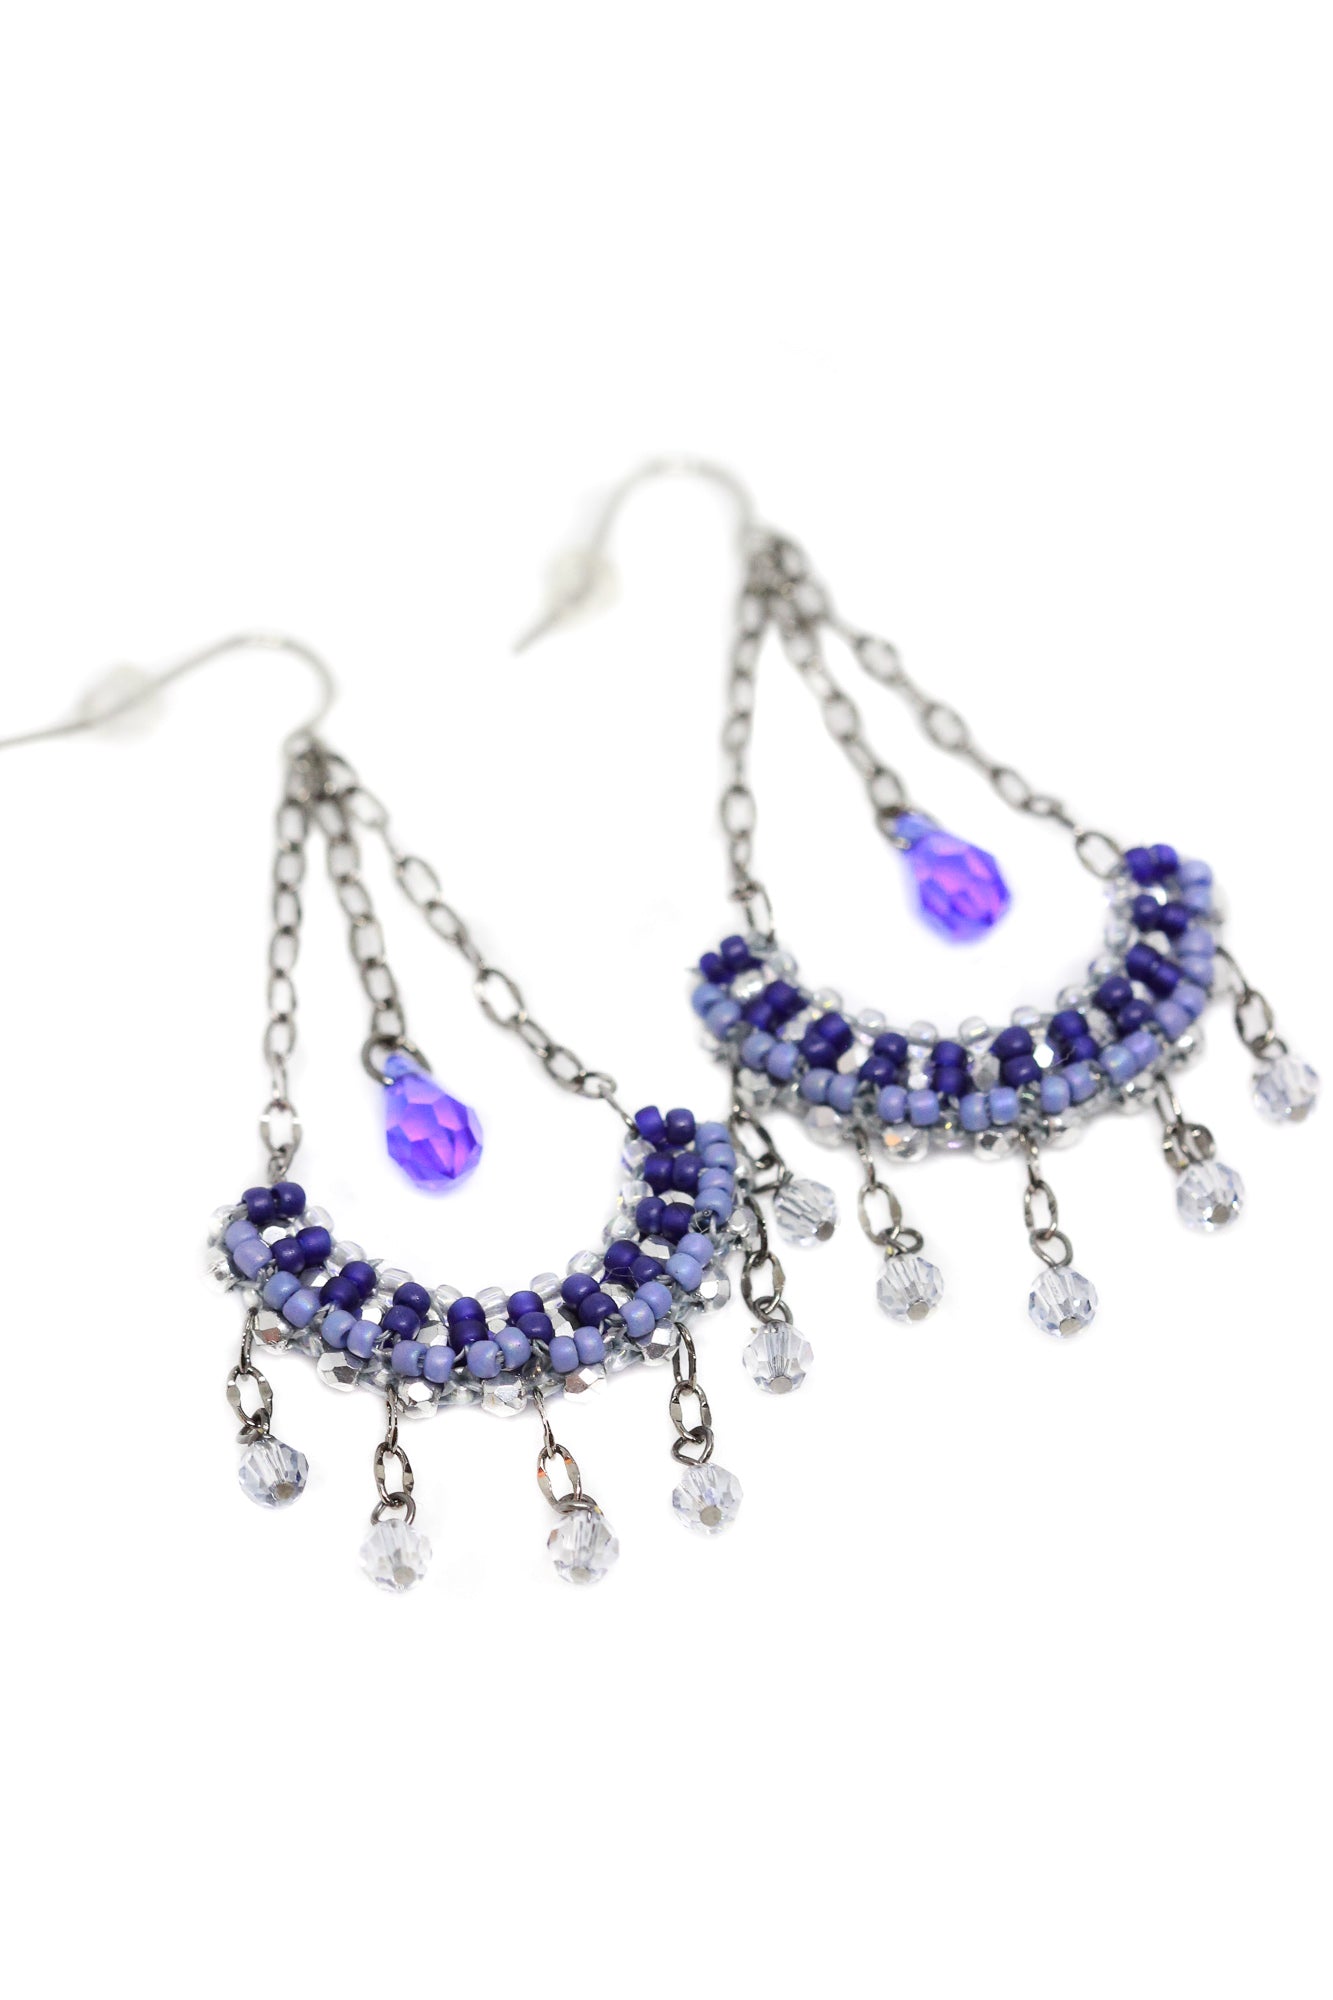 blue-chandelier-crystal-beaded-earrings-something-blue-for-wedding-by-kaleidoscopes-and-polka-dots